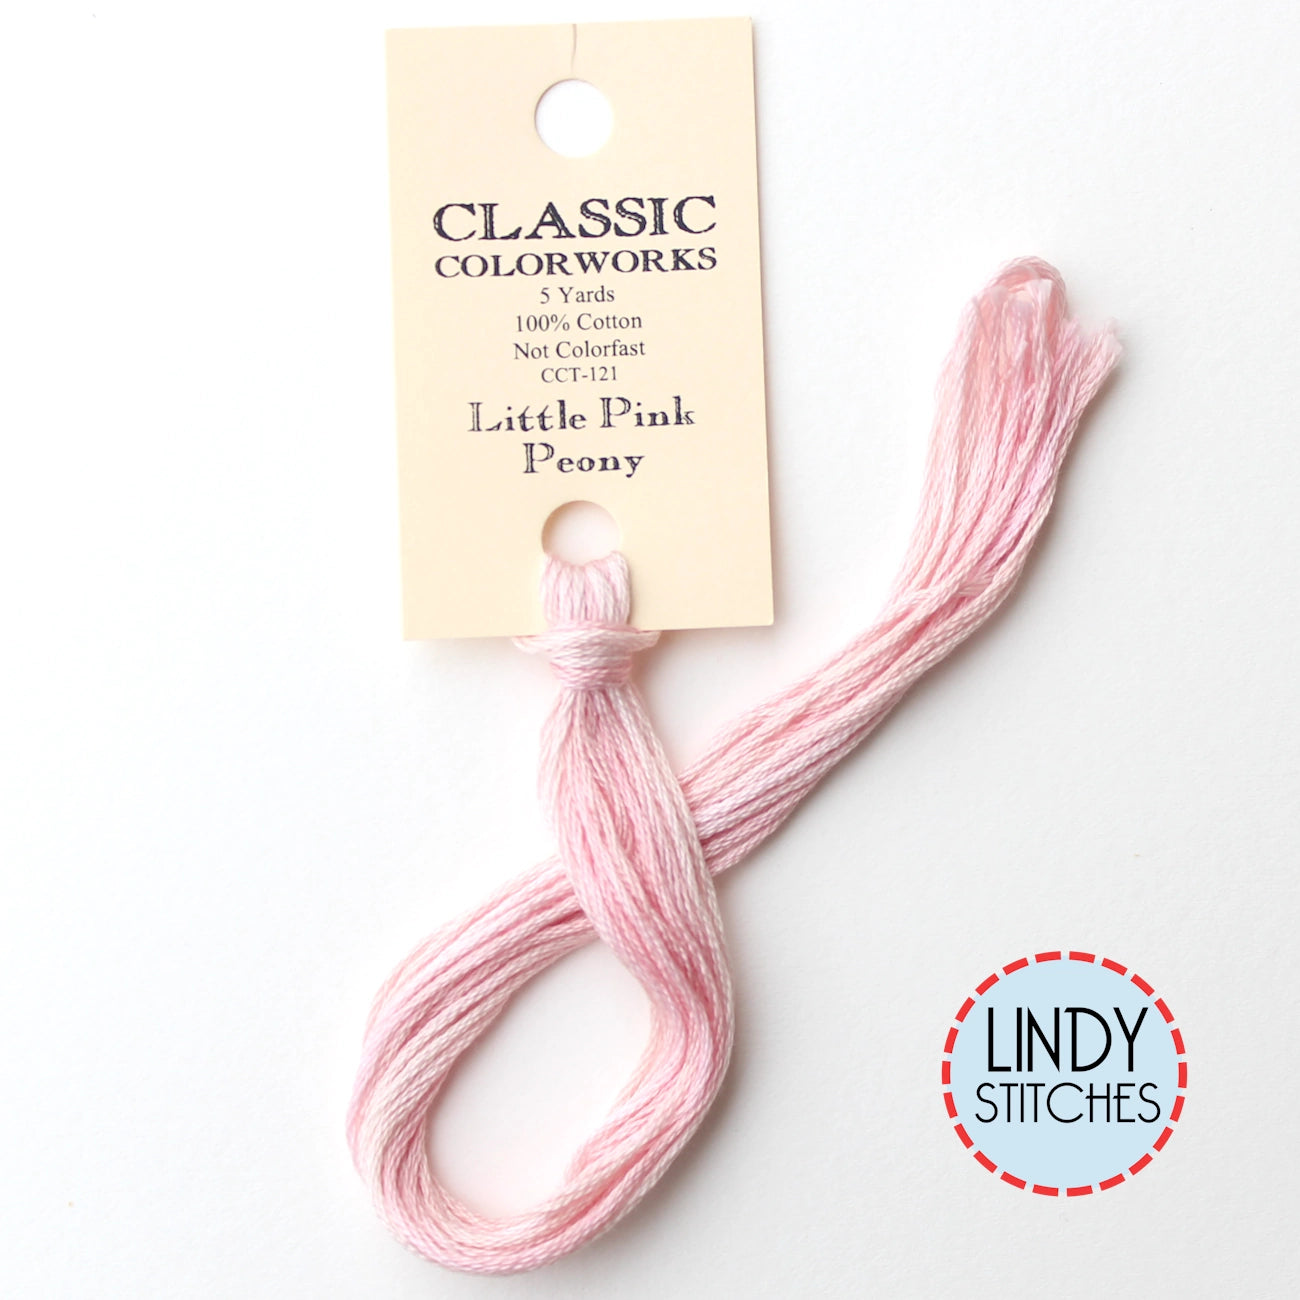 Little Pink Peony Classic Colorworks Floss Hand Dyed Cotton Skein